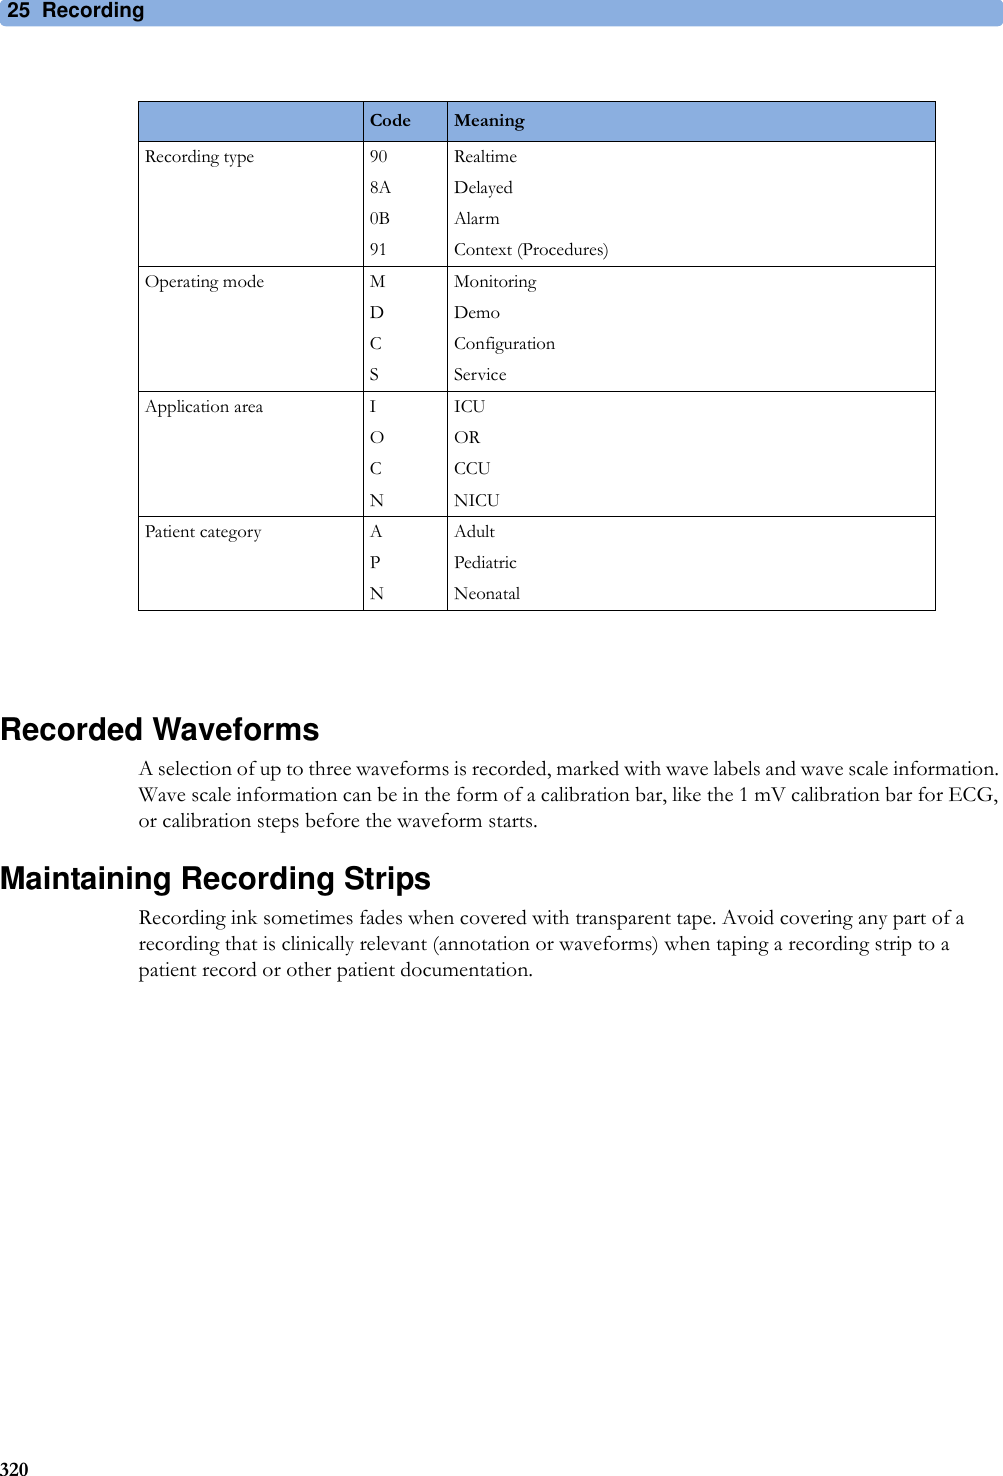 25 Recording320Recorded WaveformsA selection of up to three waveforms is recorded, marked with wave labels and wave scale information. Wave scale information can be in the form of a calibration bar, like the 1 mV calibration bar for ECG, or calibration steps before the waveform starts.Maintaining Recording StripsRecording ink sometimes fades when covered with transparent tape. Avoid covering any part of a recording that is clinically relevant (annotation or waveforms) when taping a recording strip to a patient record or other patient documentation.Code MeaningRecording type 908A0B91RealtimeDelayedAlarmContext (Procedures)Operating mode MDCSMonitoringDemoConfigurationServiceApplication area IOCNICUORCCUNICUPatient category APNAdultPediatricNeonatal